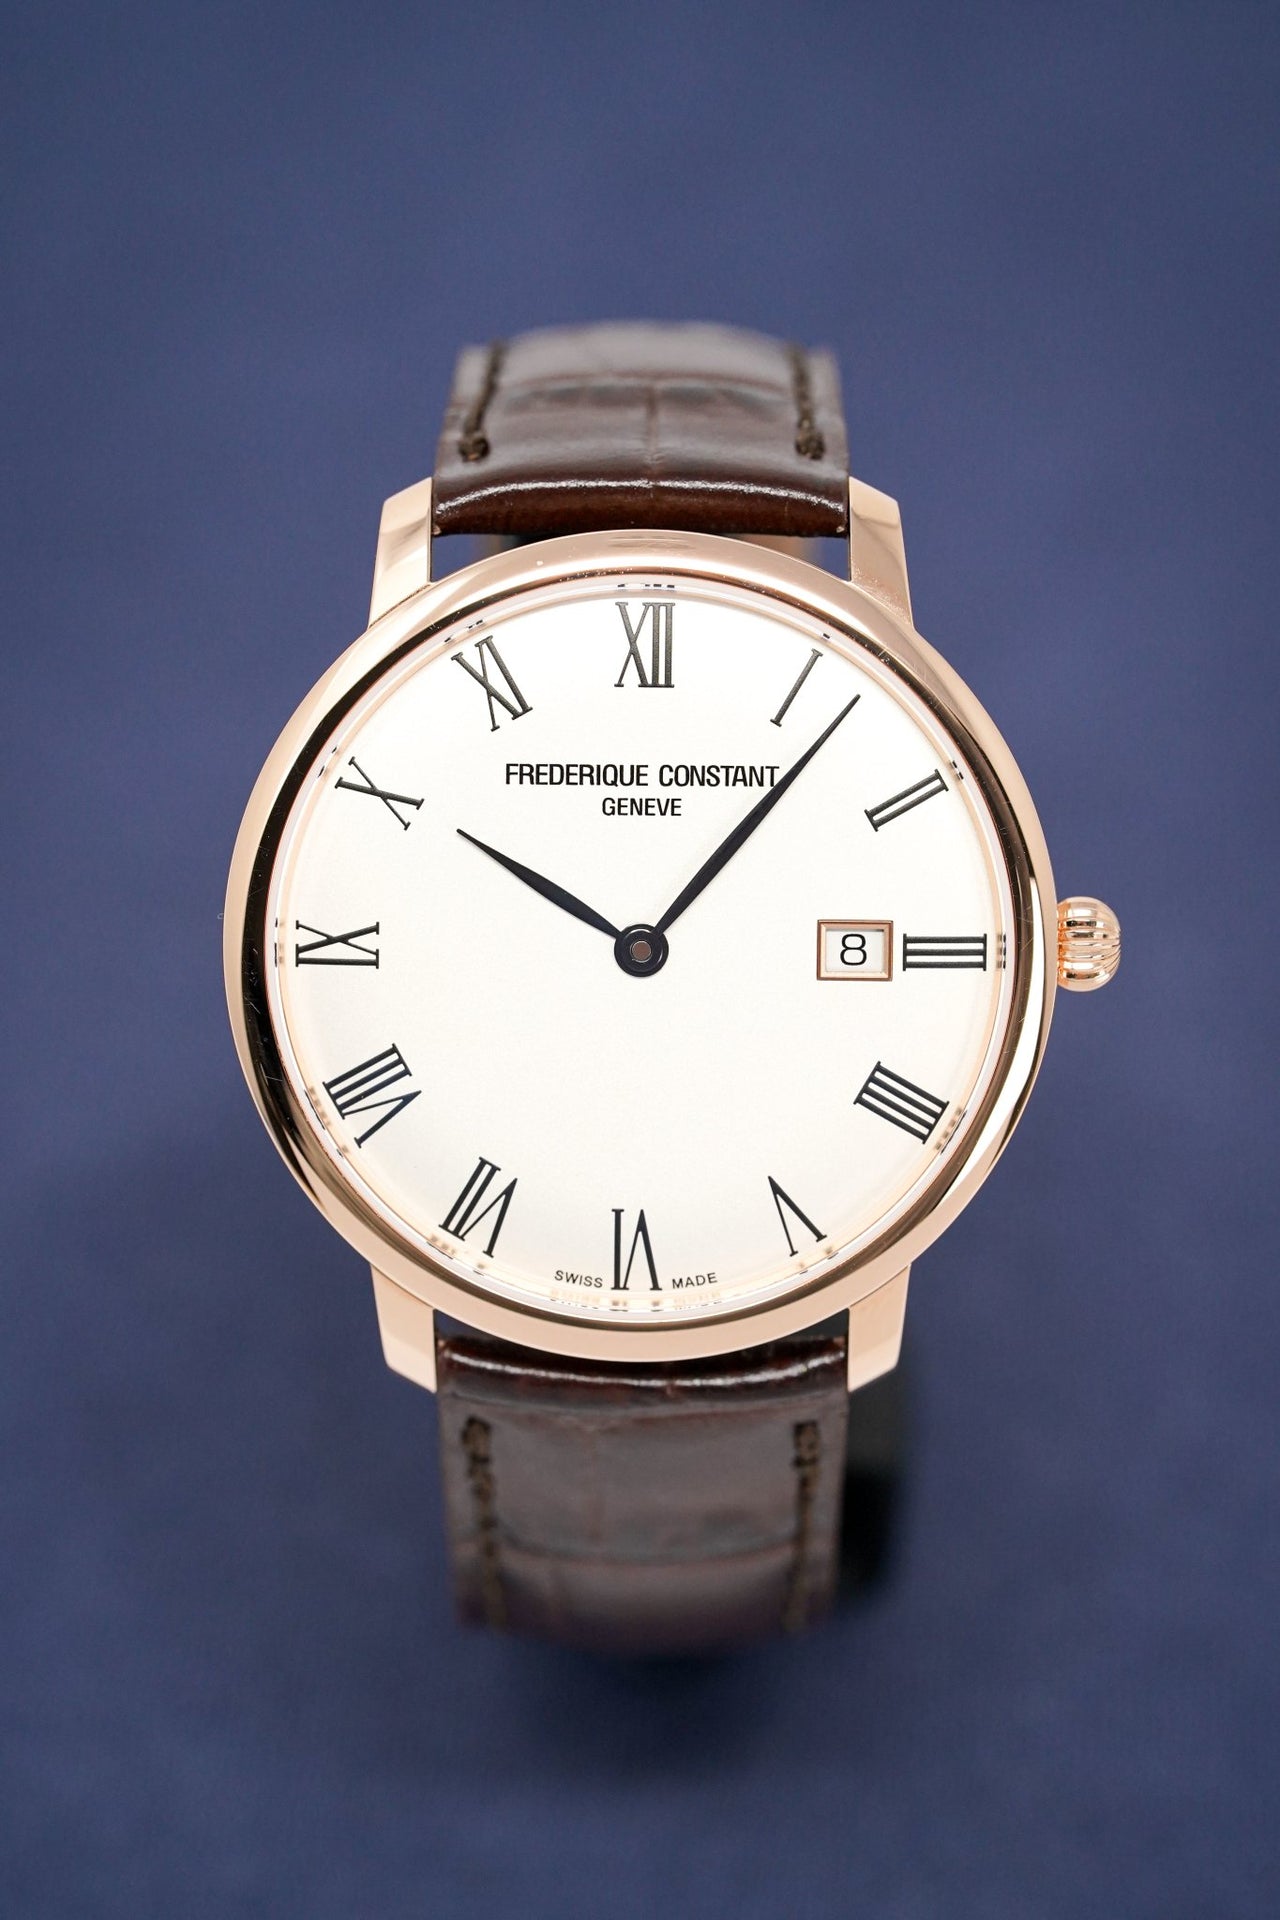 Frederique Constant Slimline Automatic Men's Watch FC-306MR4S4 - Watches & Crystals